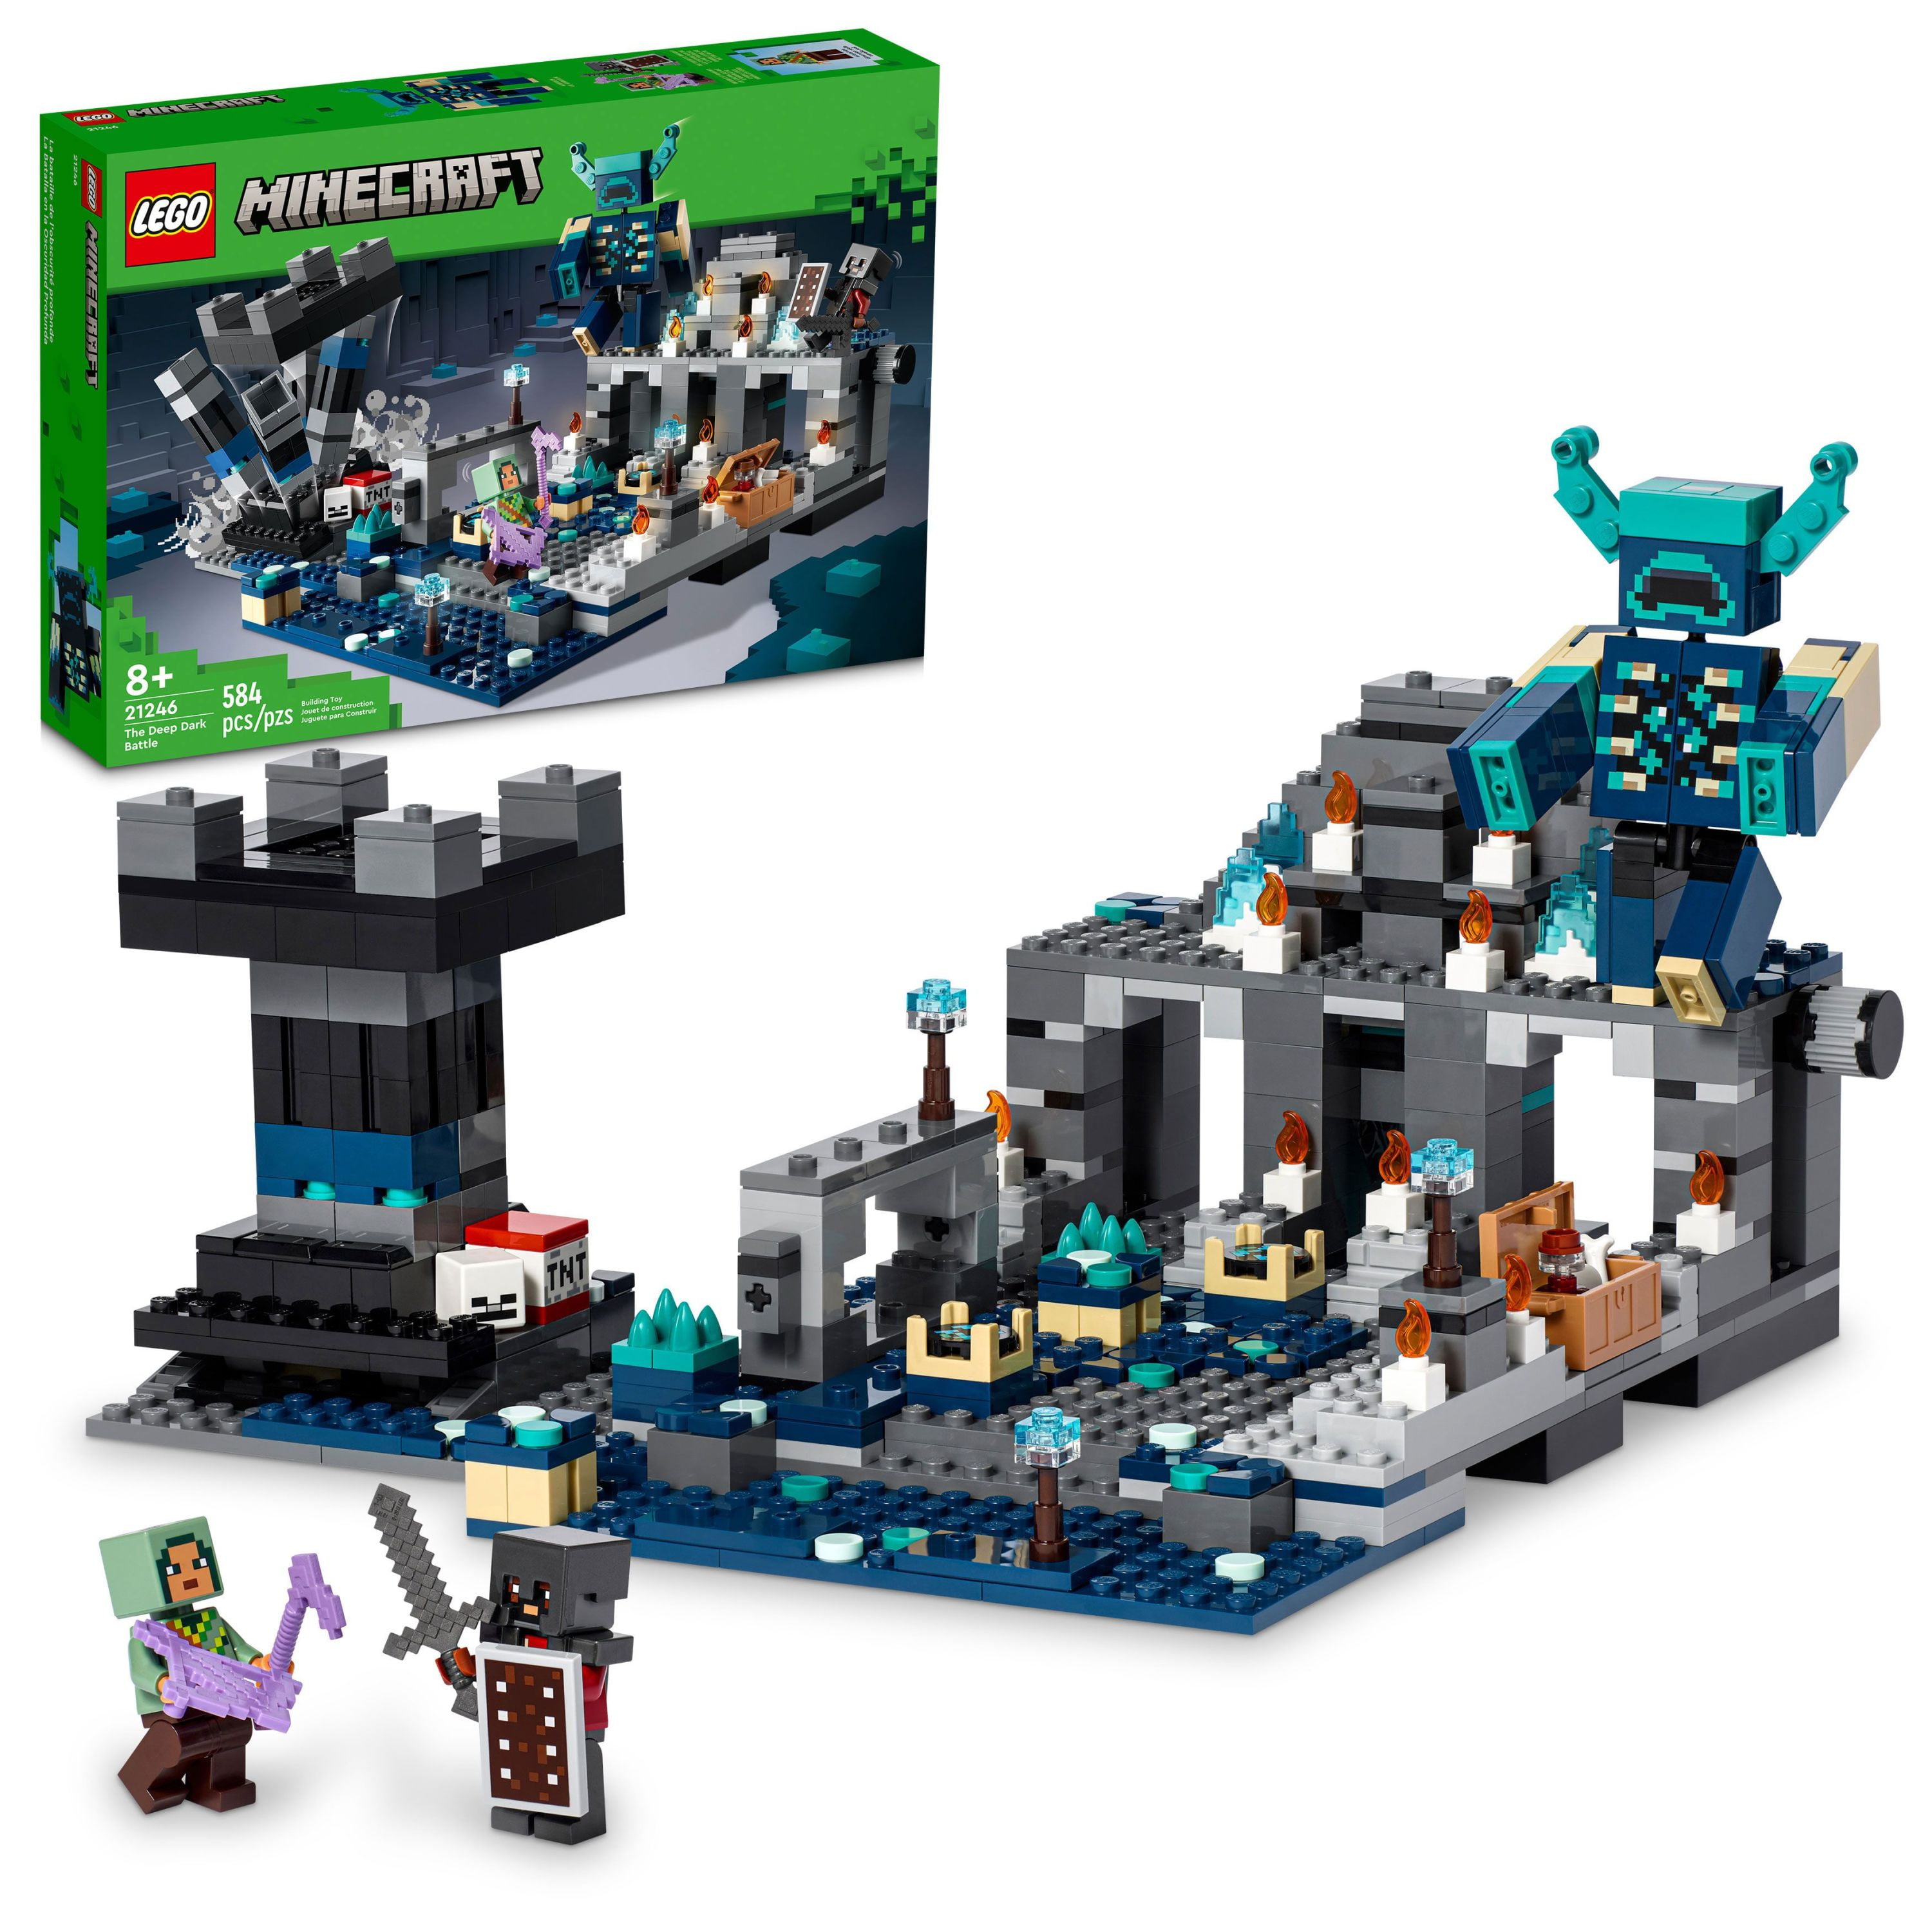 LEGO Minecraft The Deep Dark Battle Set, 21246 Biome Adventure Toy, Ancient  City with Warden Figure, Exploding Tower & Treasure Chest, for Kids Ages 8